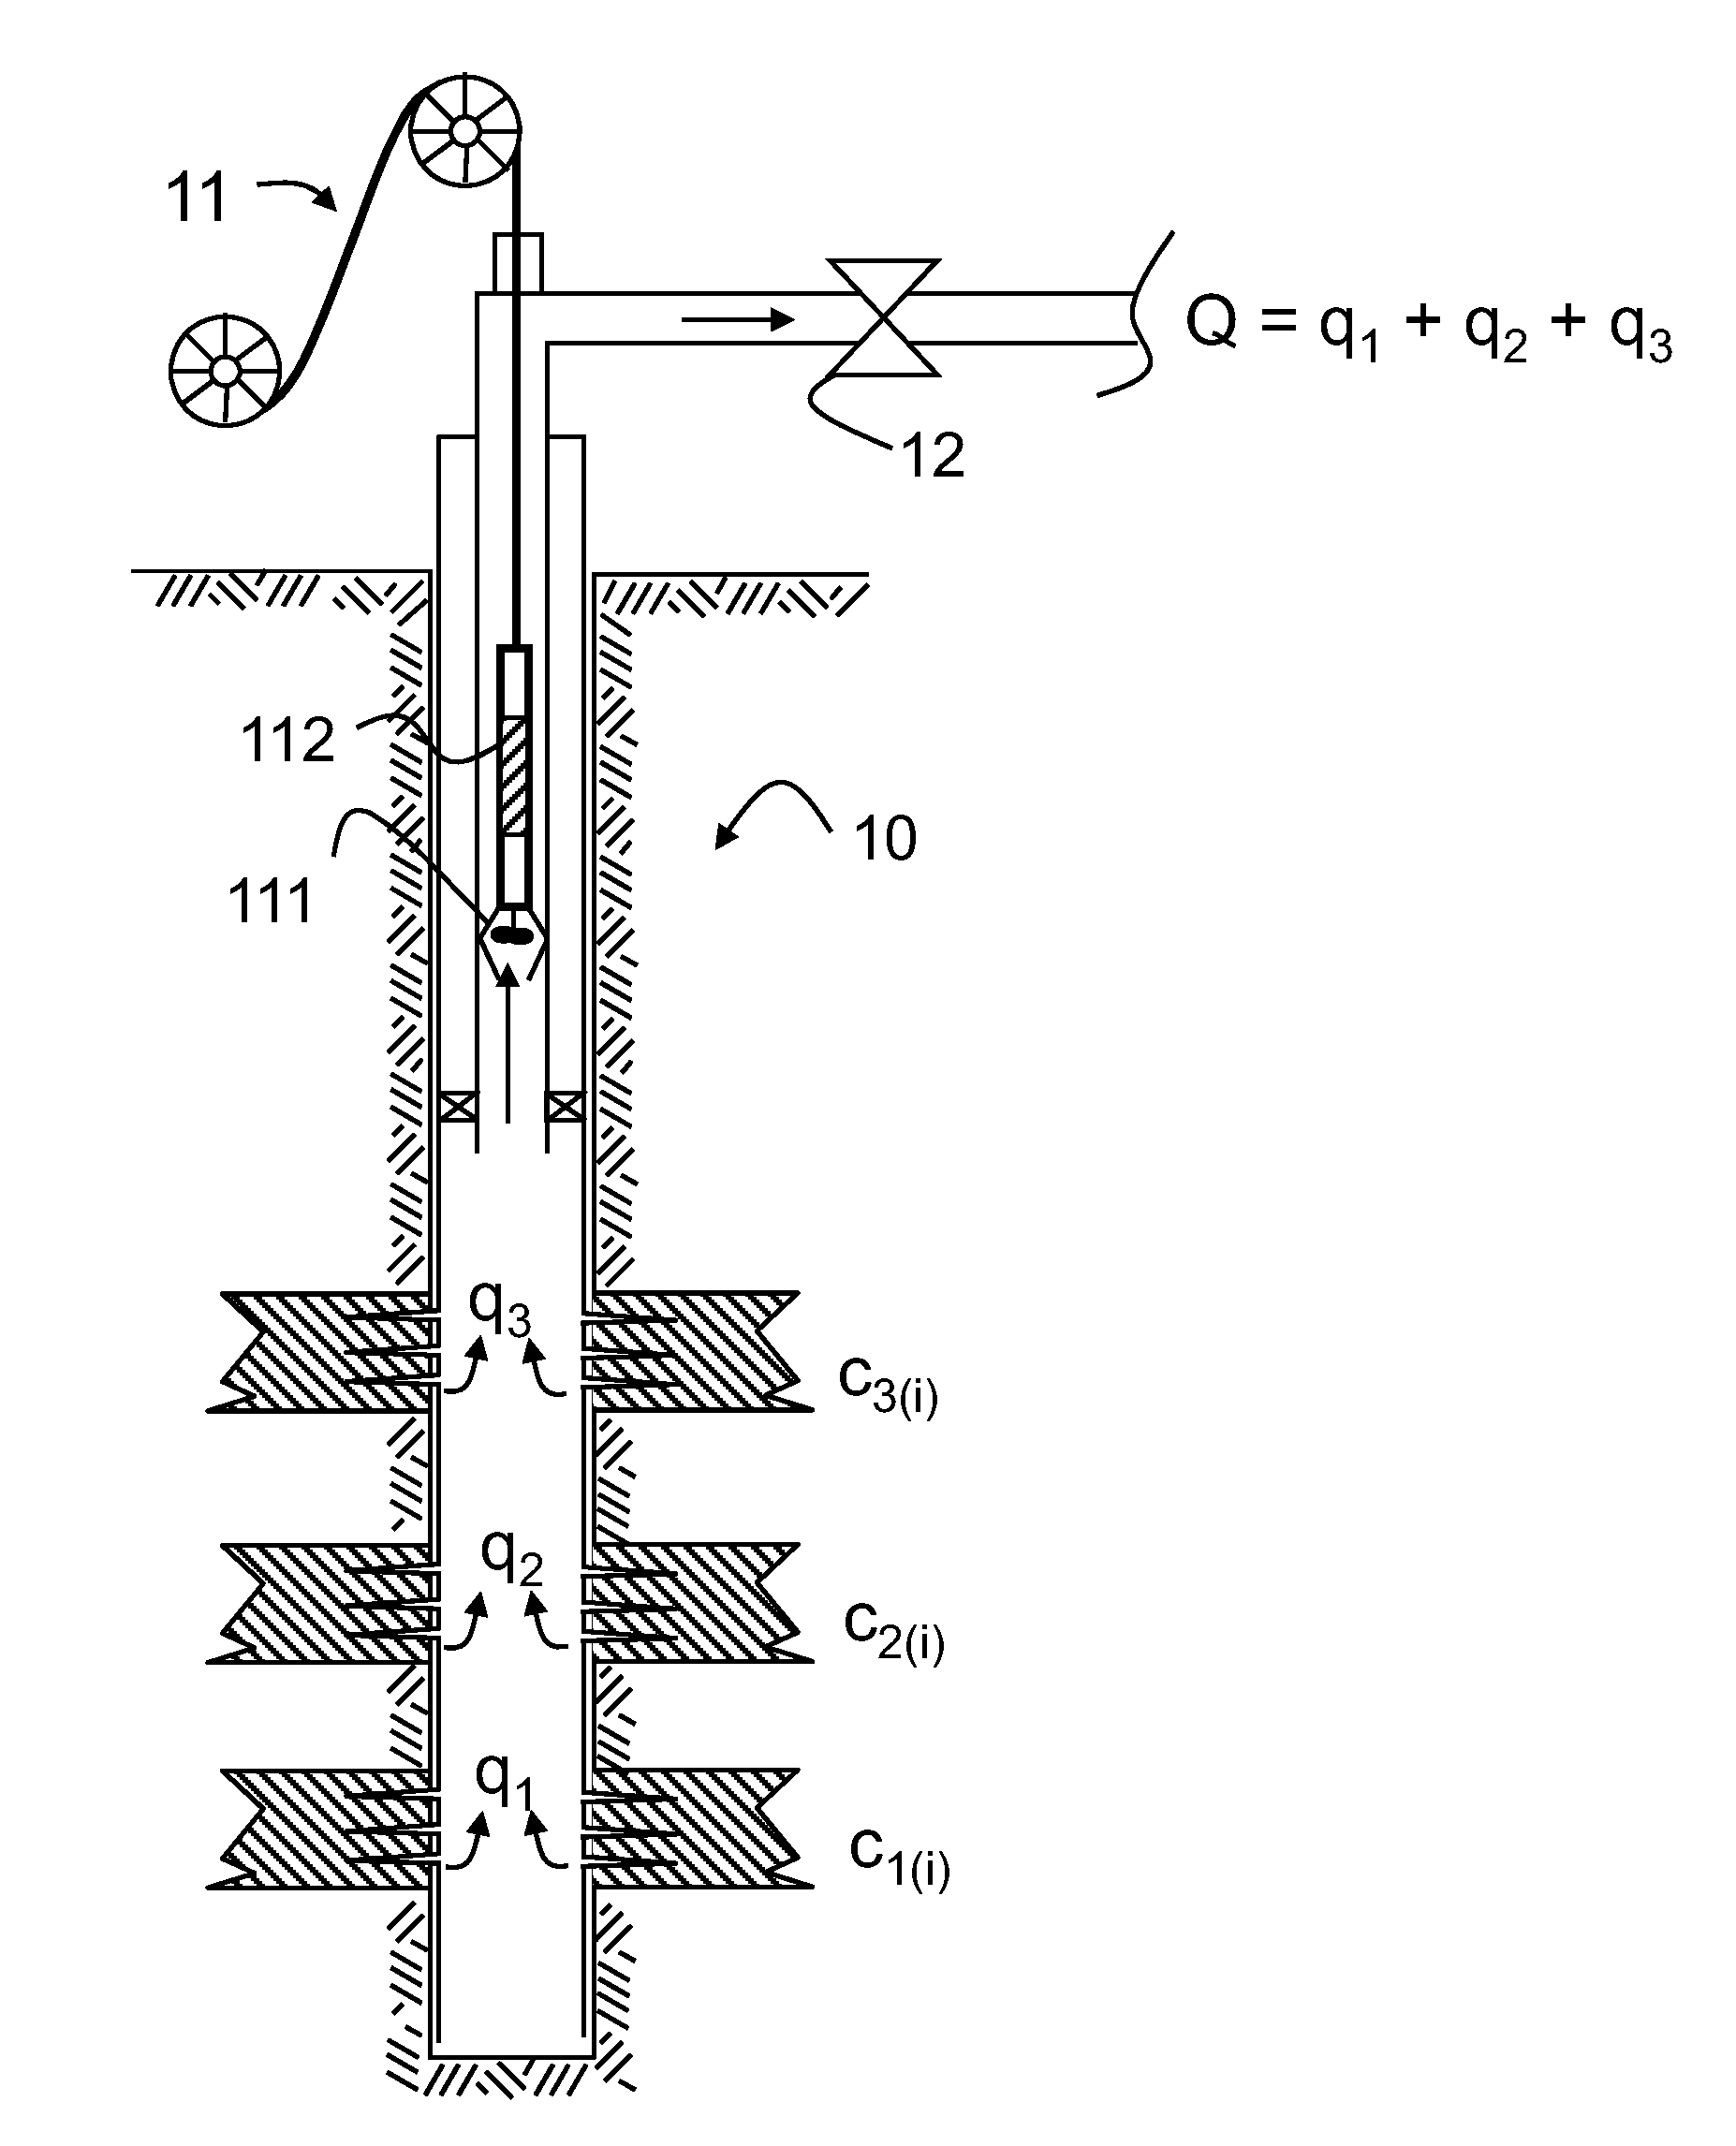 Method of determining end member concentrations